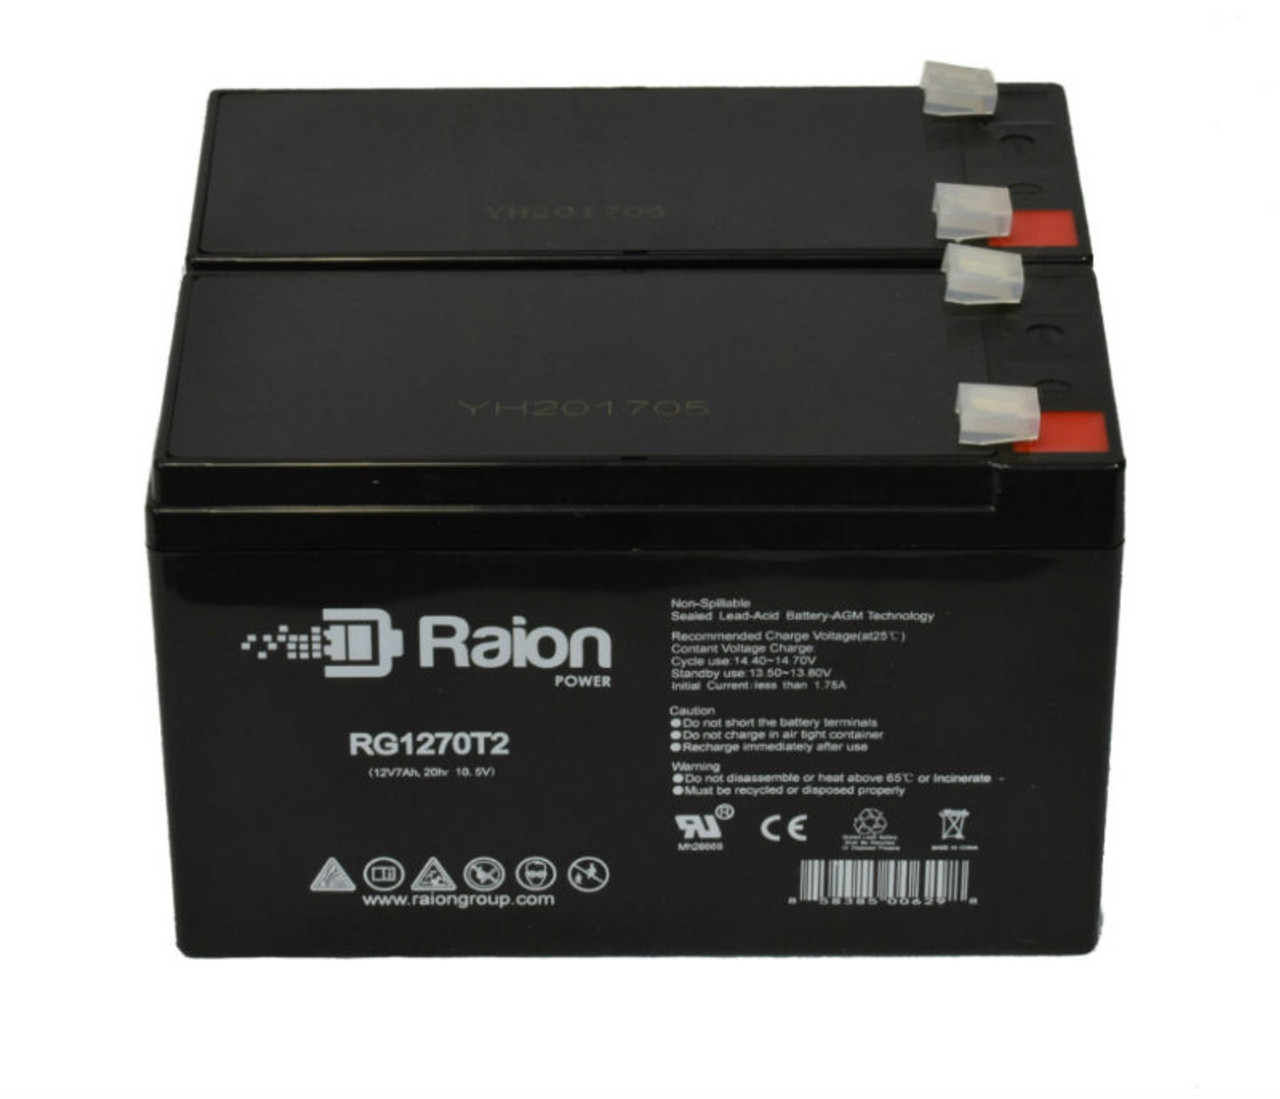 Raion Power Replacement 12V 7Ah Battery for Vision CG12-7A - 2 Pack